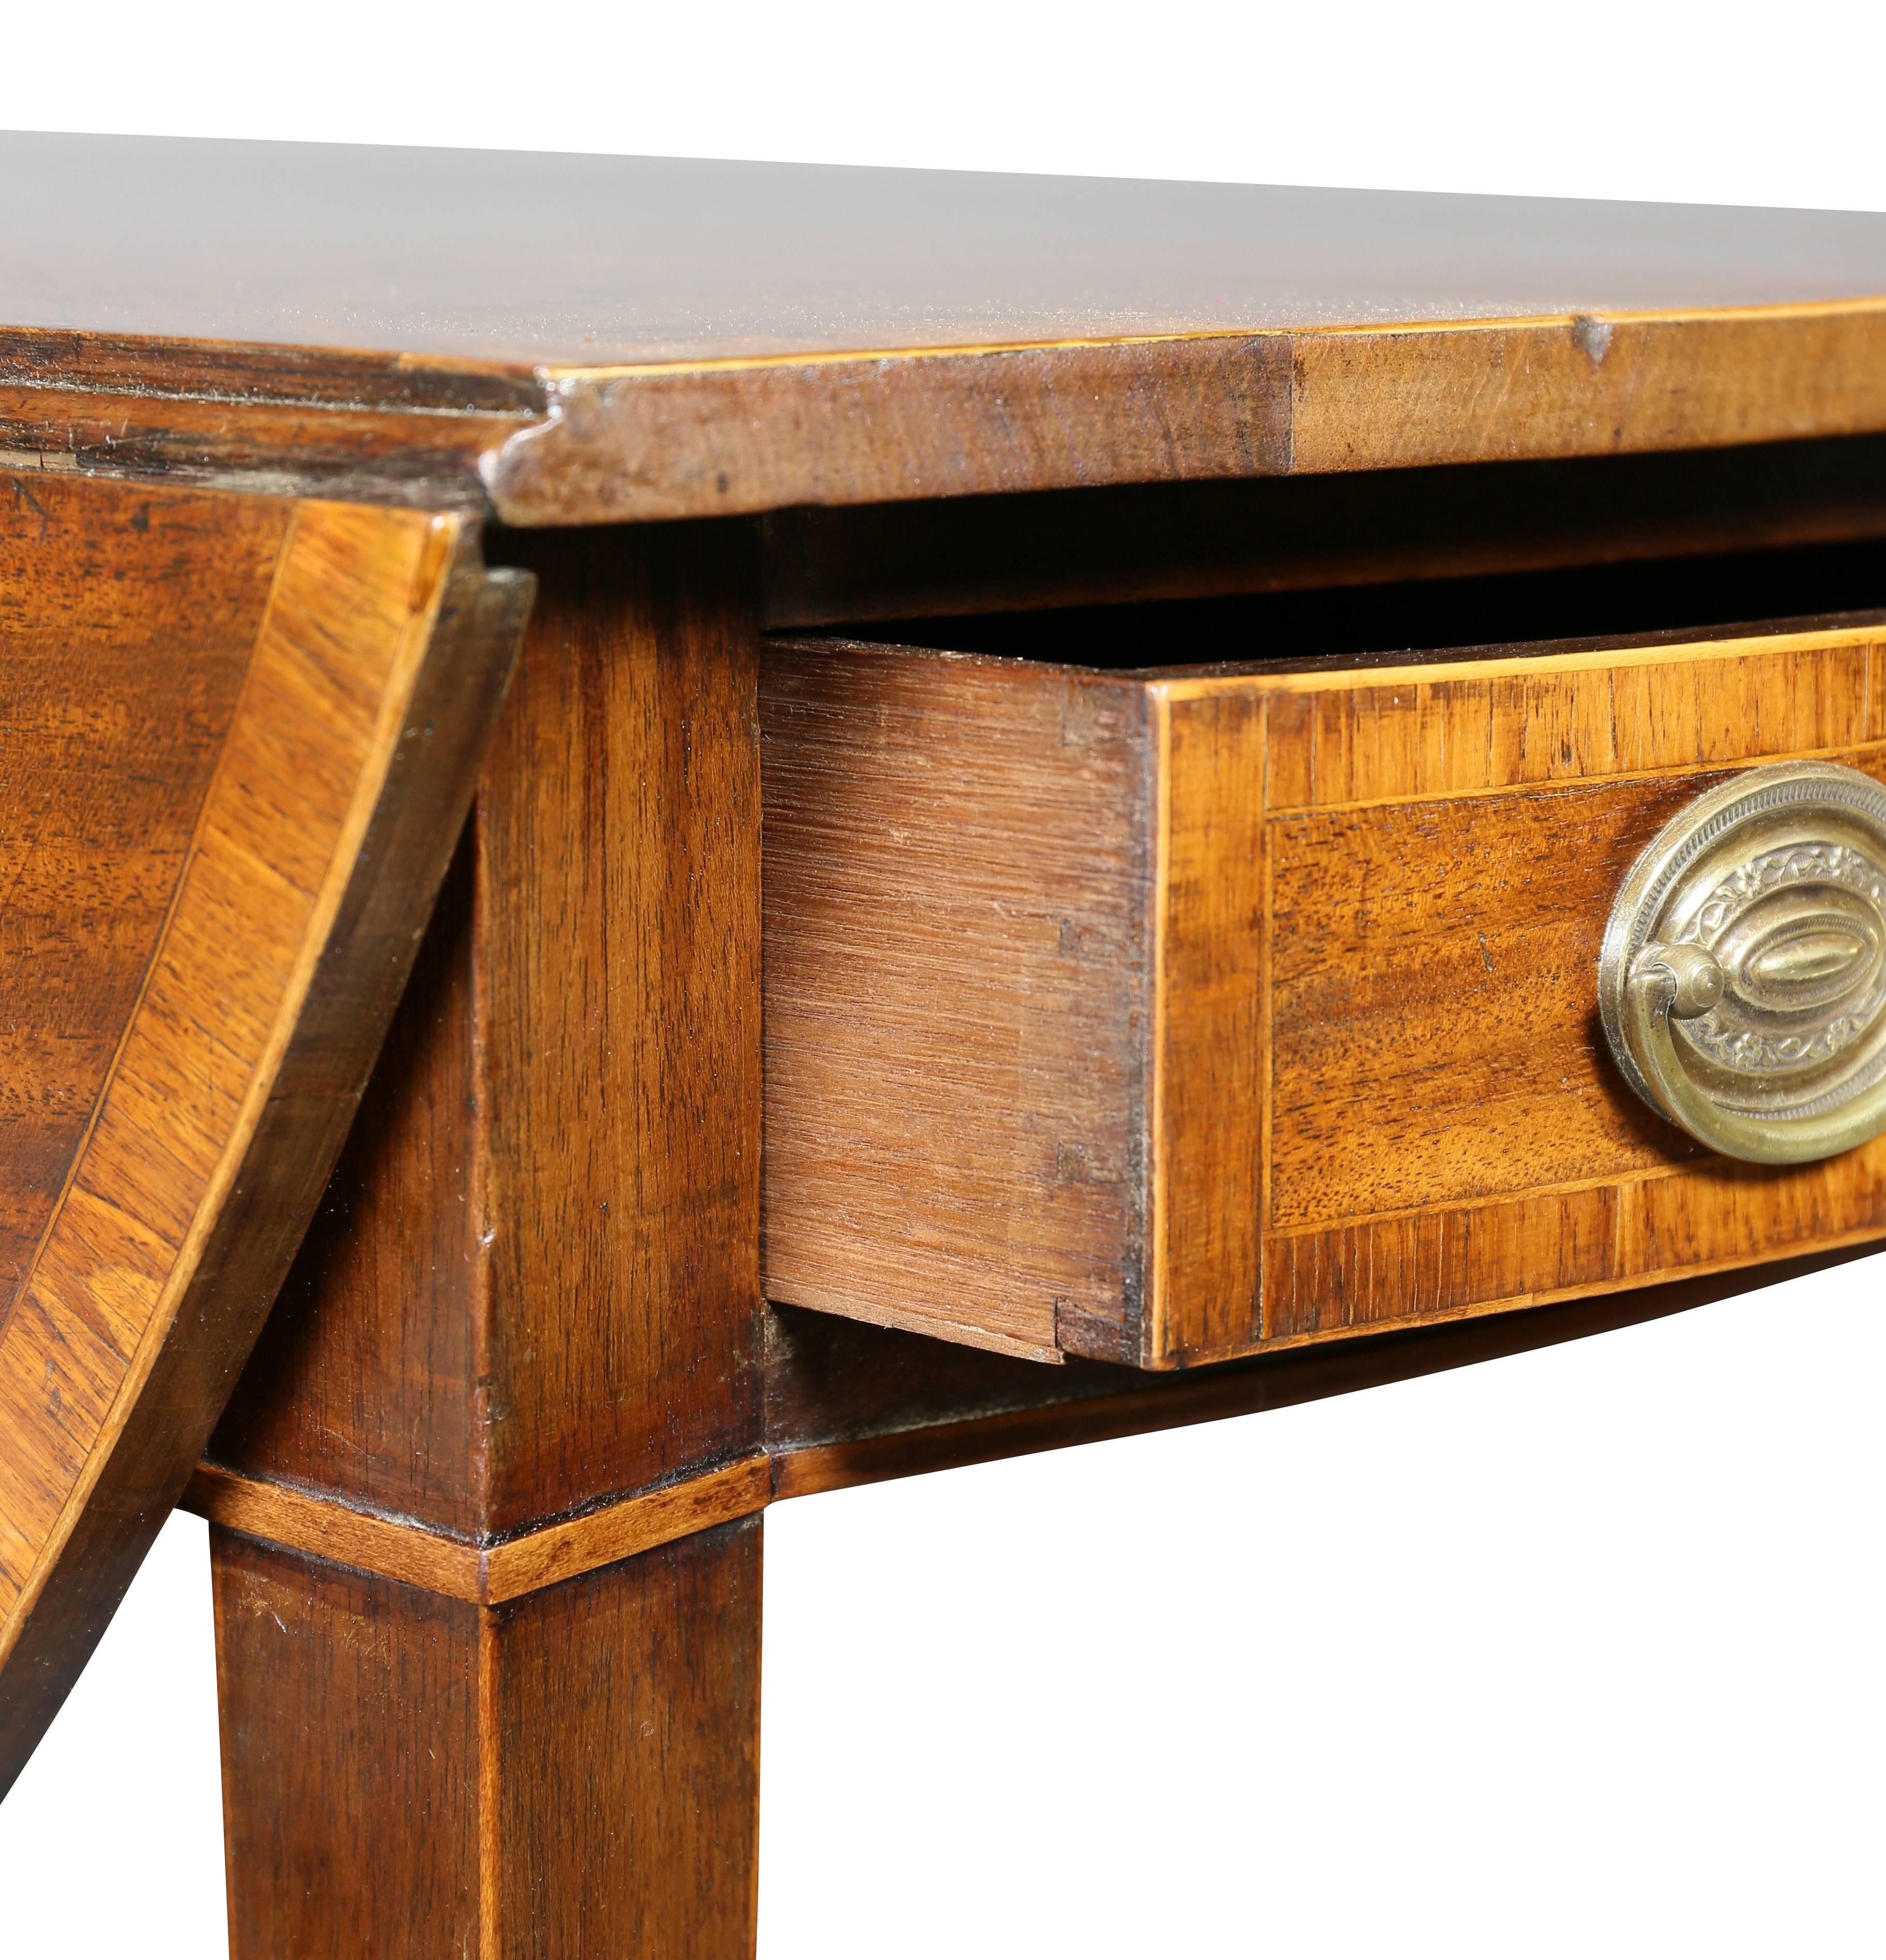 Bowed rectangular with D shaped leaves over a frieze containing a drawer and an opposing false drawer, square tapered legs and casters.